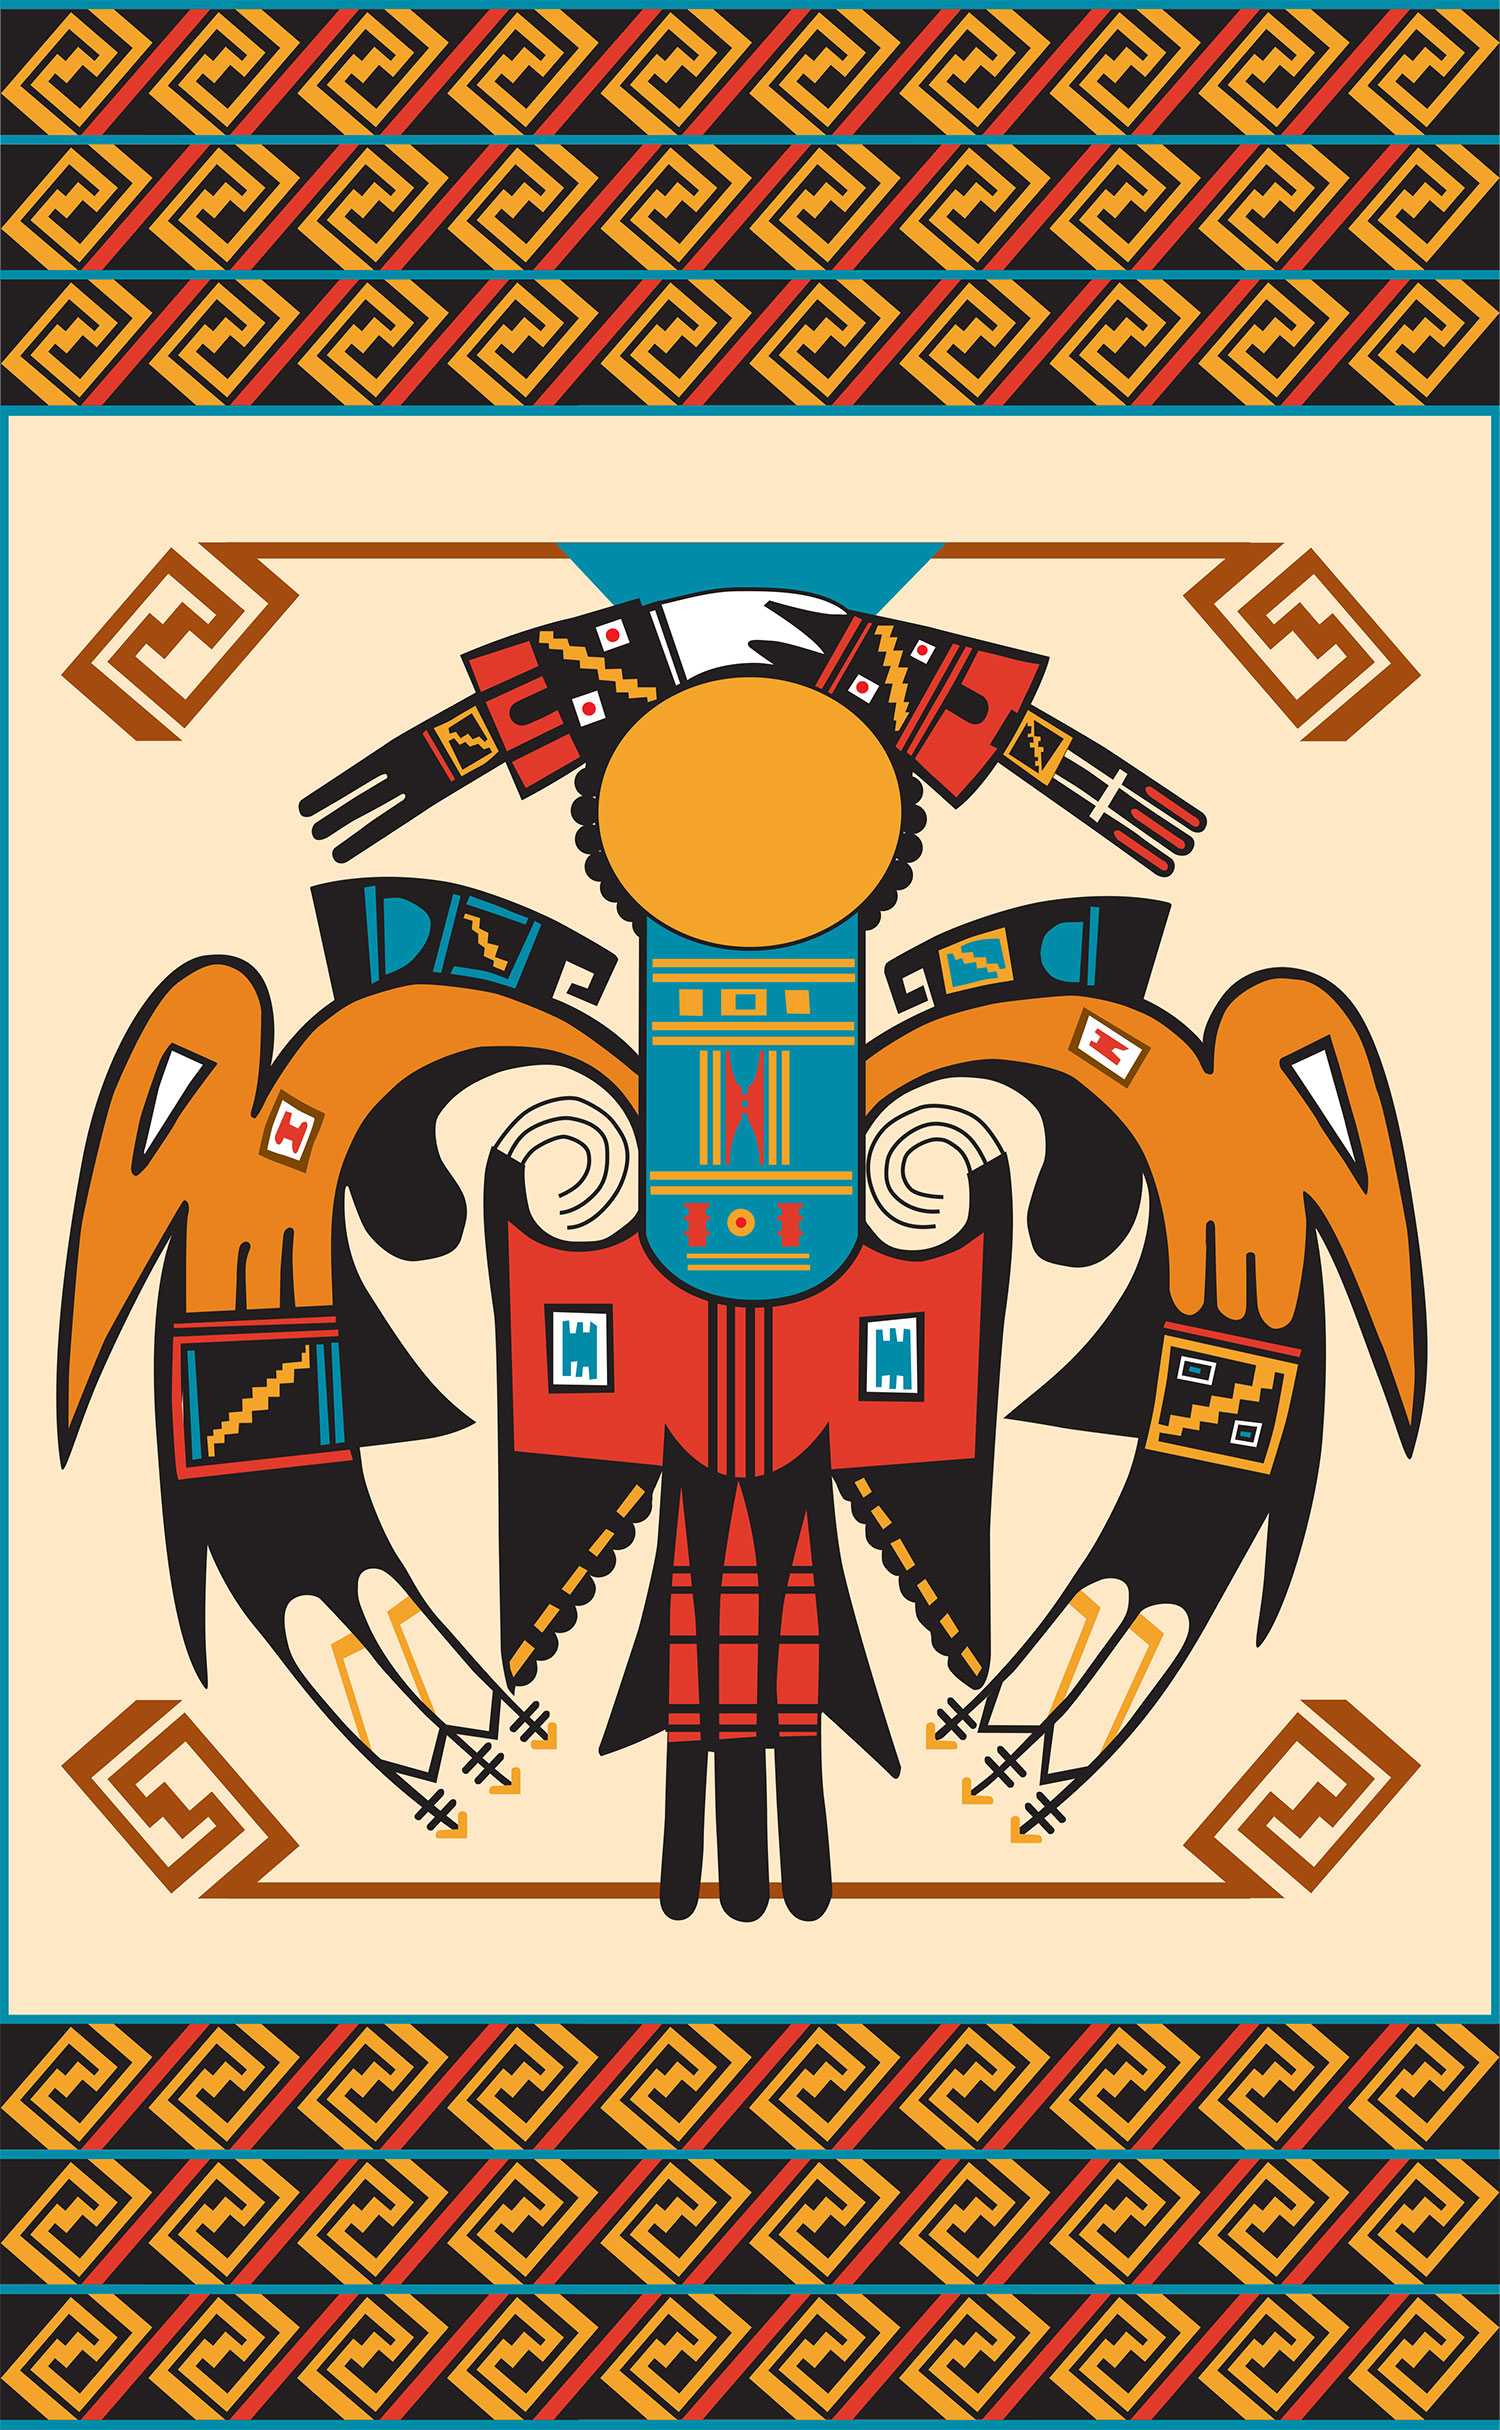 Native American Thunderbird Art Artist proving point about